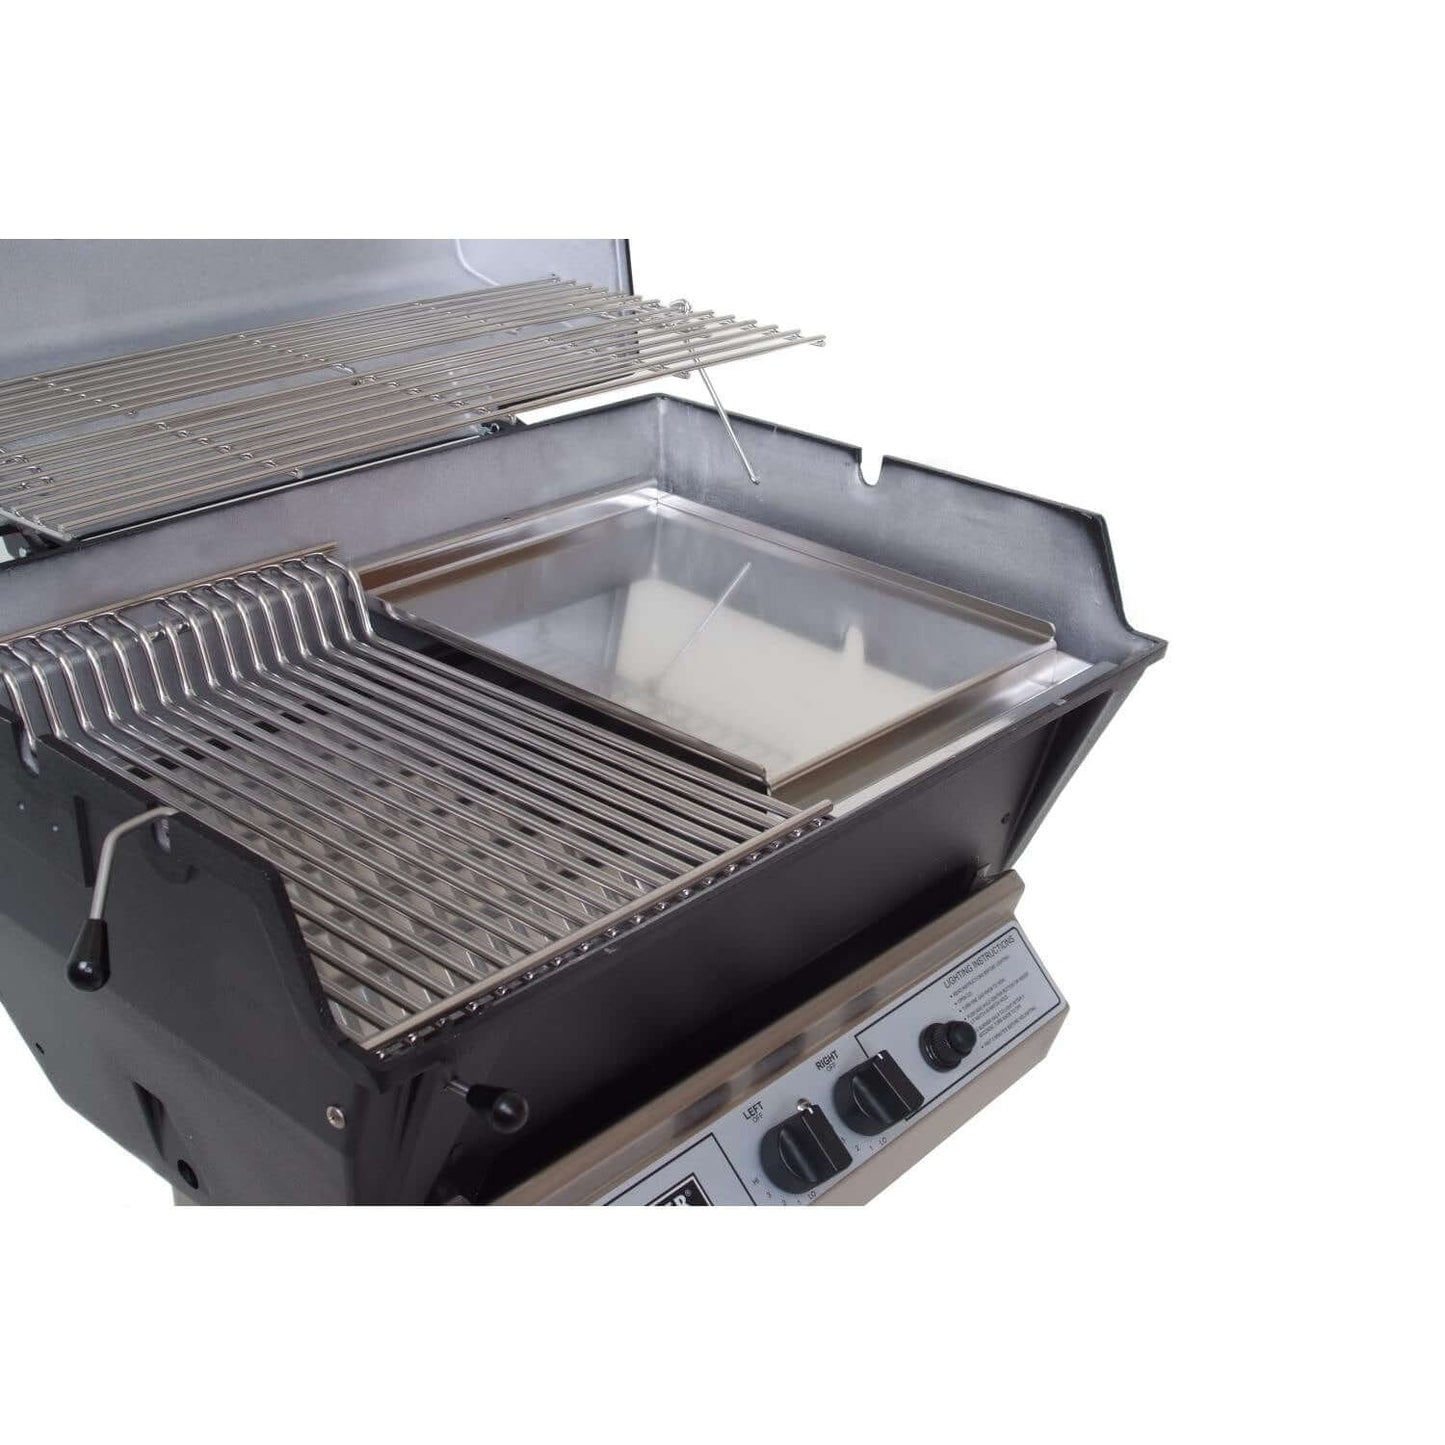 Broilmaster P3-SXN Super Premium Natural Gas Grill On Stainless Steel In-Ground Post